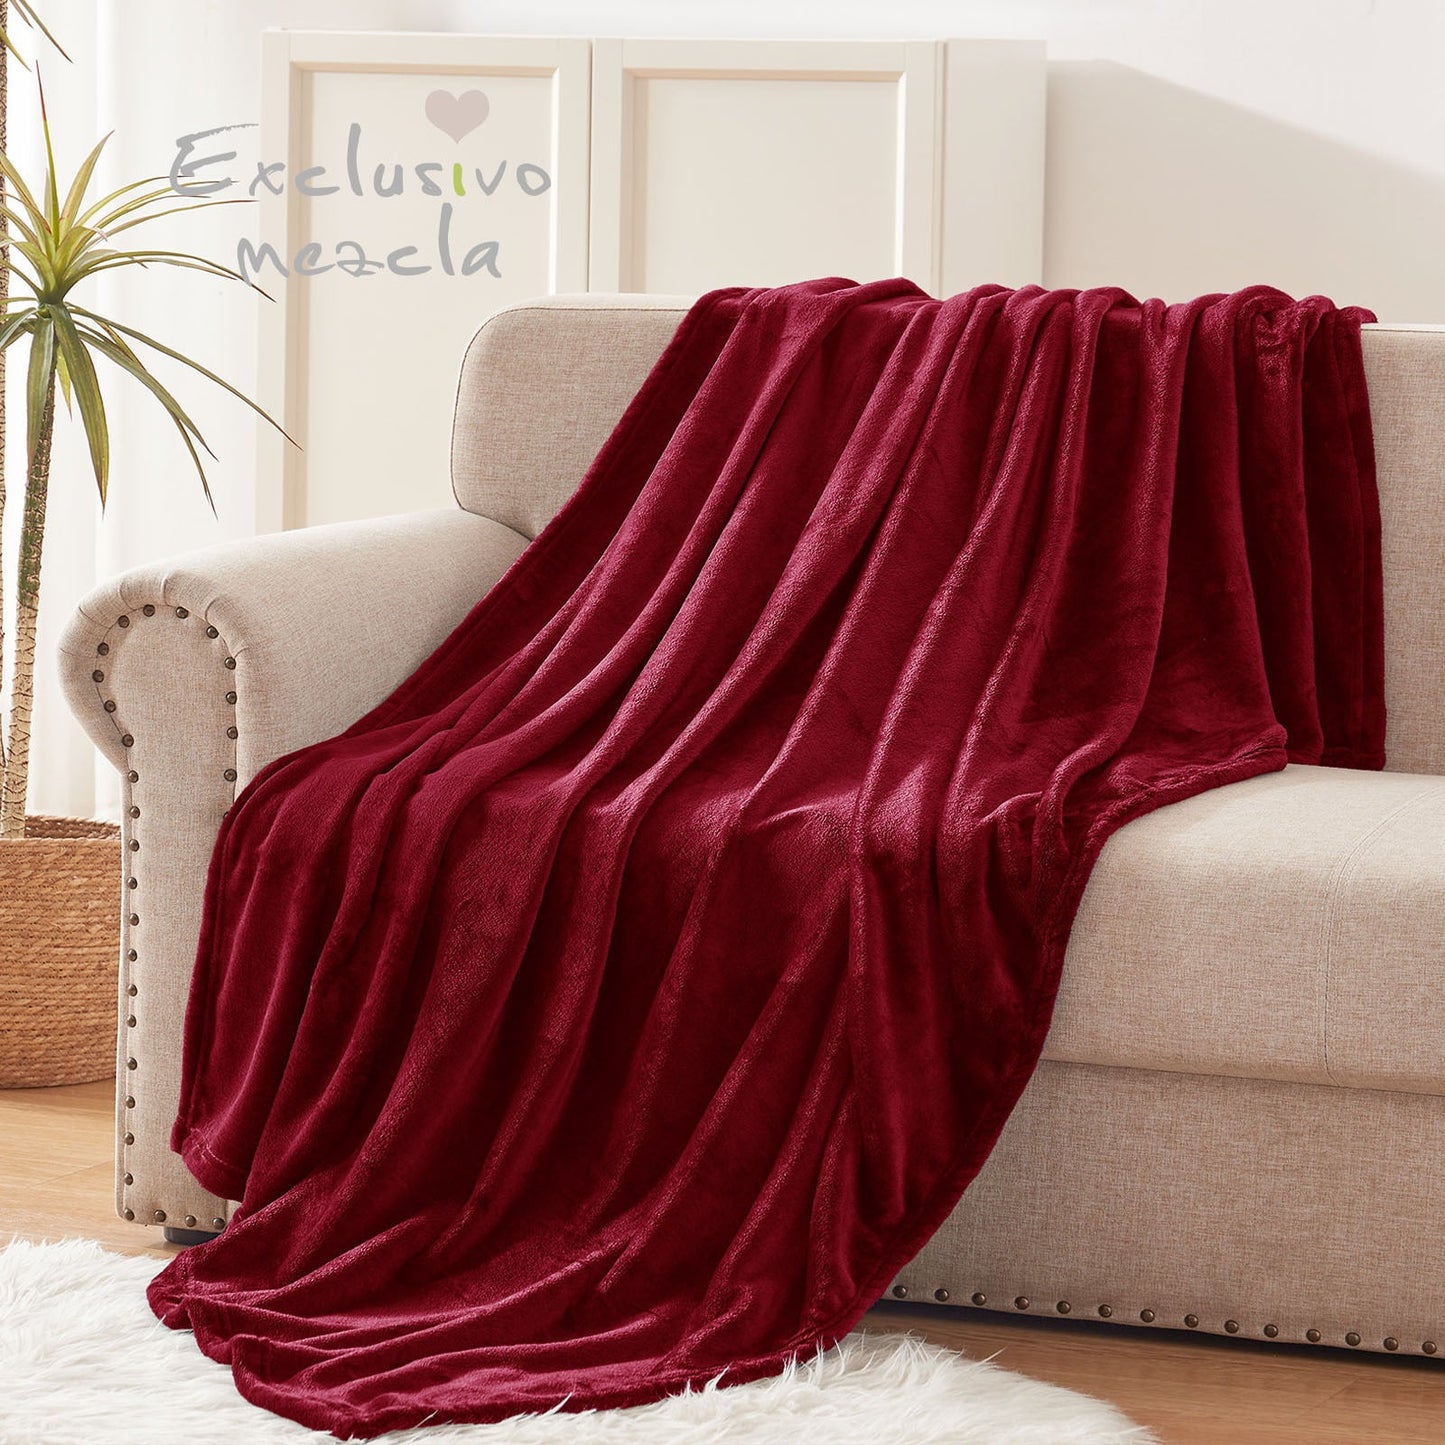 Exclusivo Mezcla Fleece Throw Blanket for Couch/Sofa/Bed,Plush Soft Blankets and Throws,Lightweight and Cozy-50" x 60" (Burgundy)